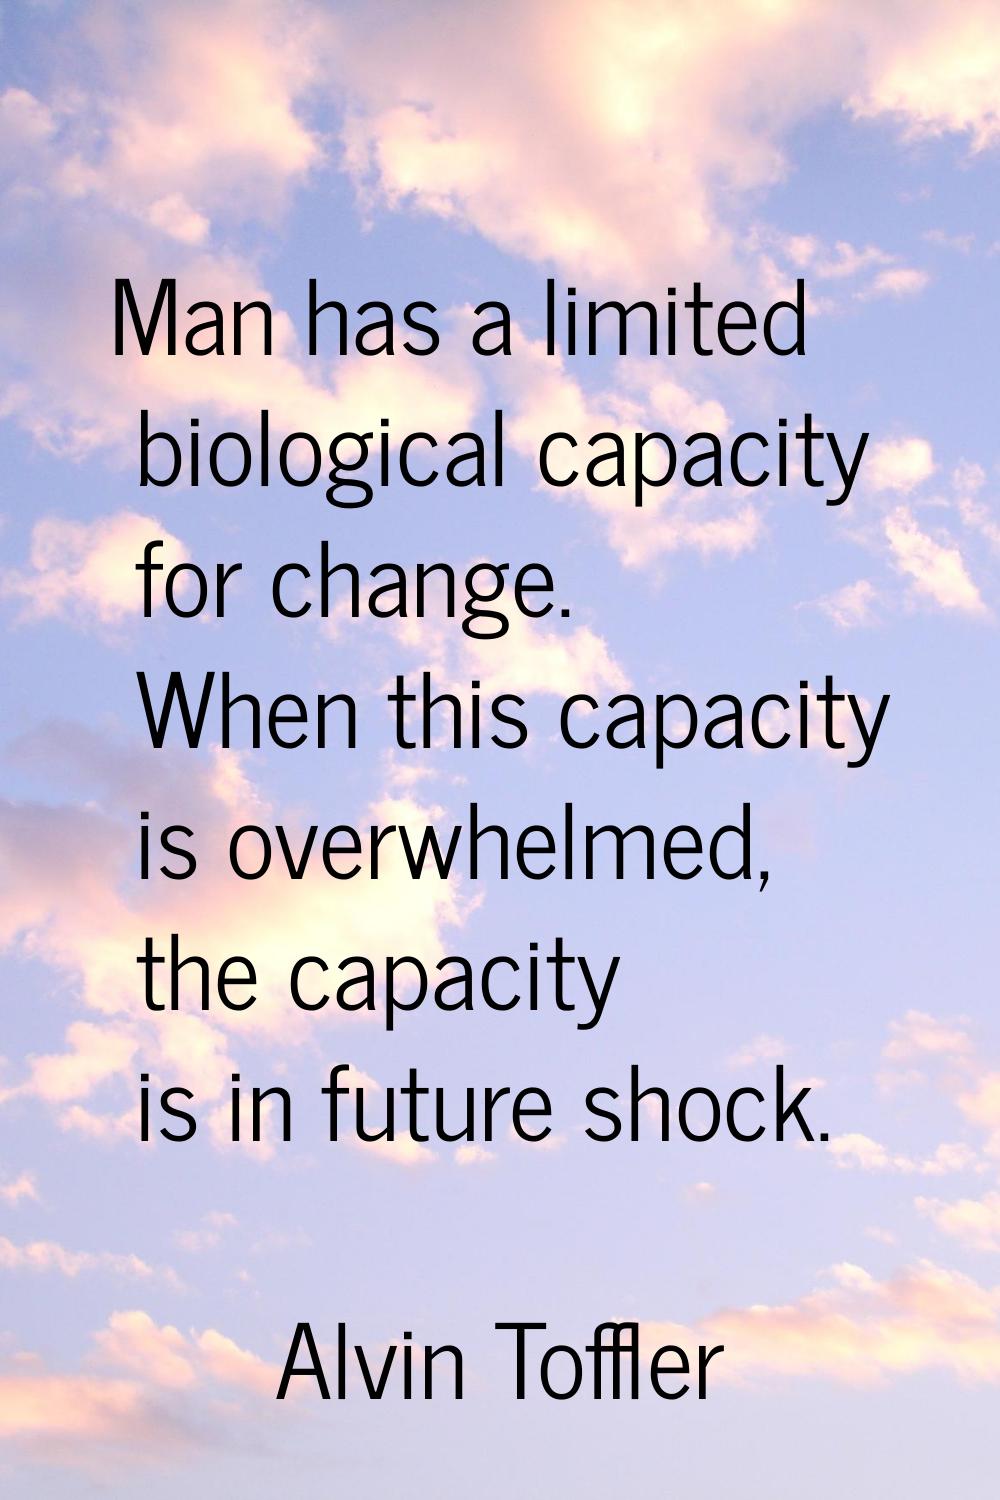 Man has a limited biological capacity for change. When this capacity is overwhelmed, the capacity i